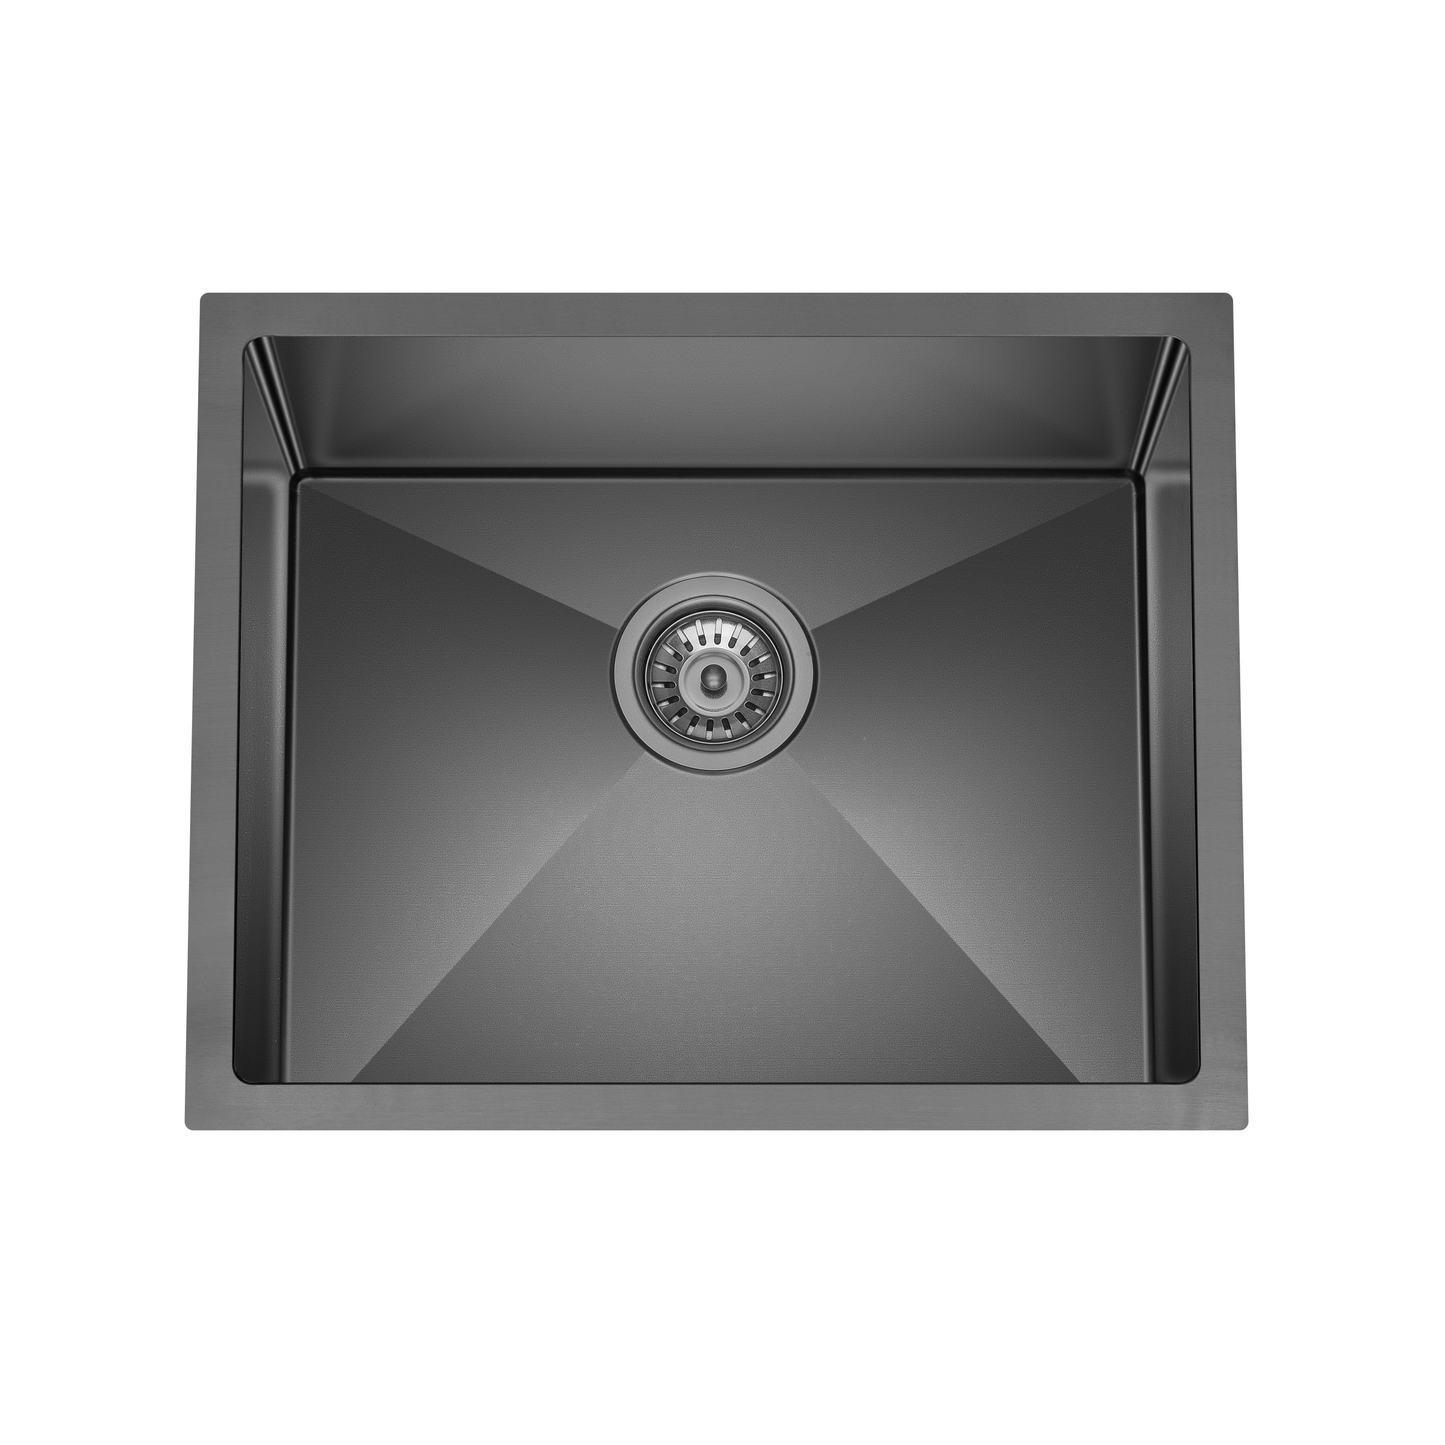 Retto 550mm x 450mm x 300mm Extra Height Stainless Steel Sink | Brushed Gun Metal (black) |